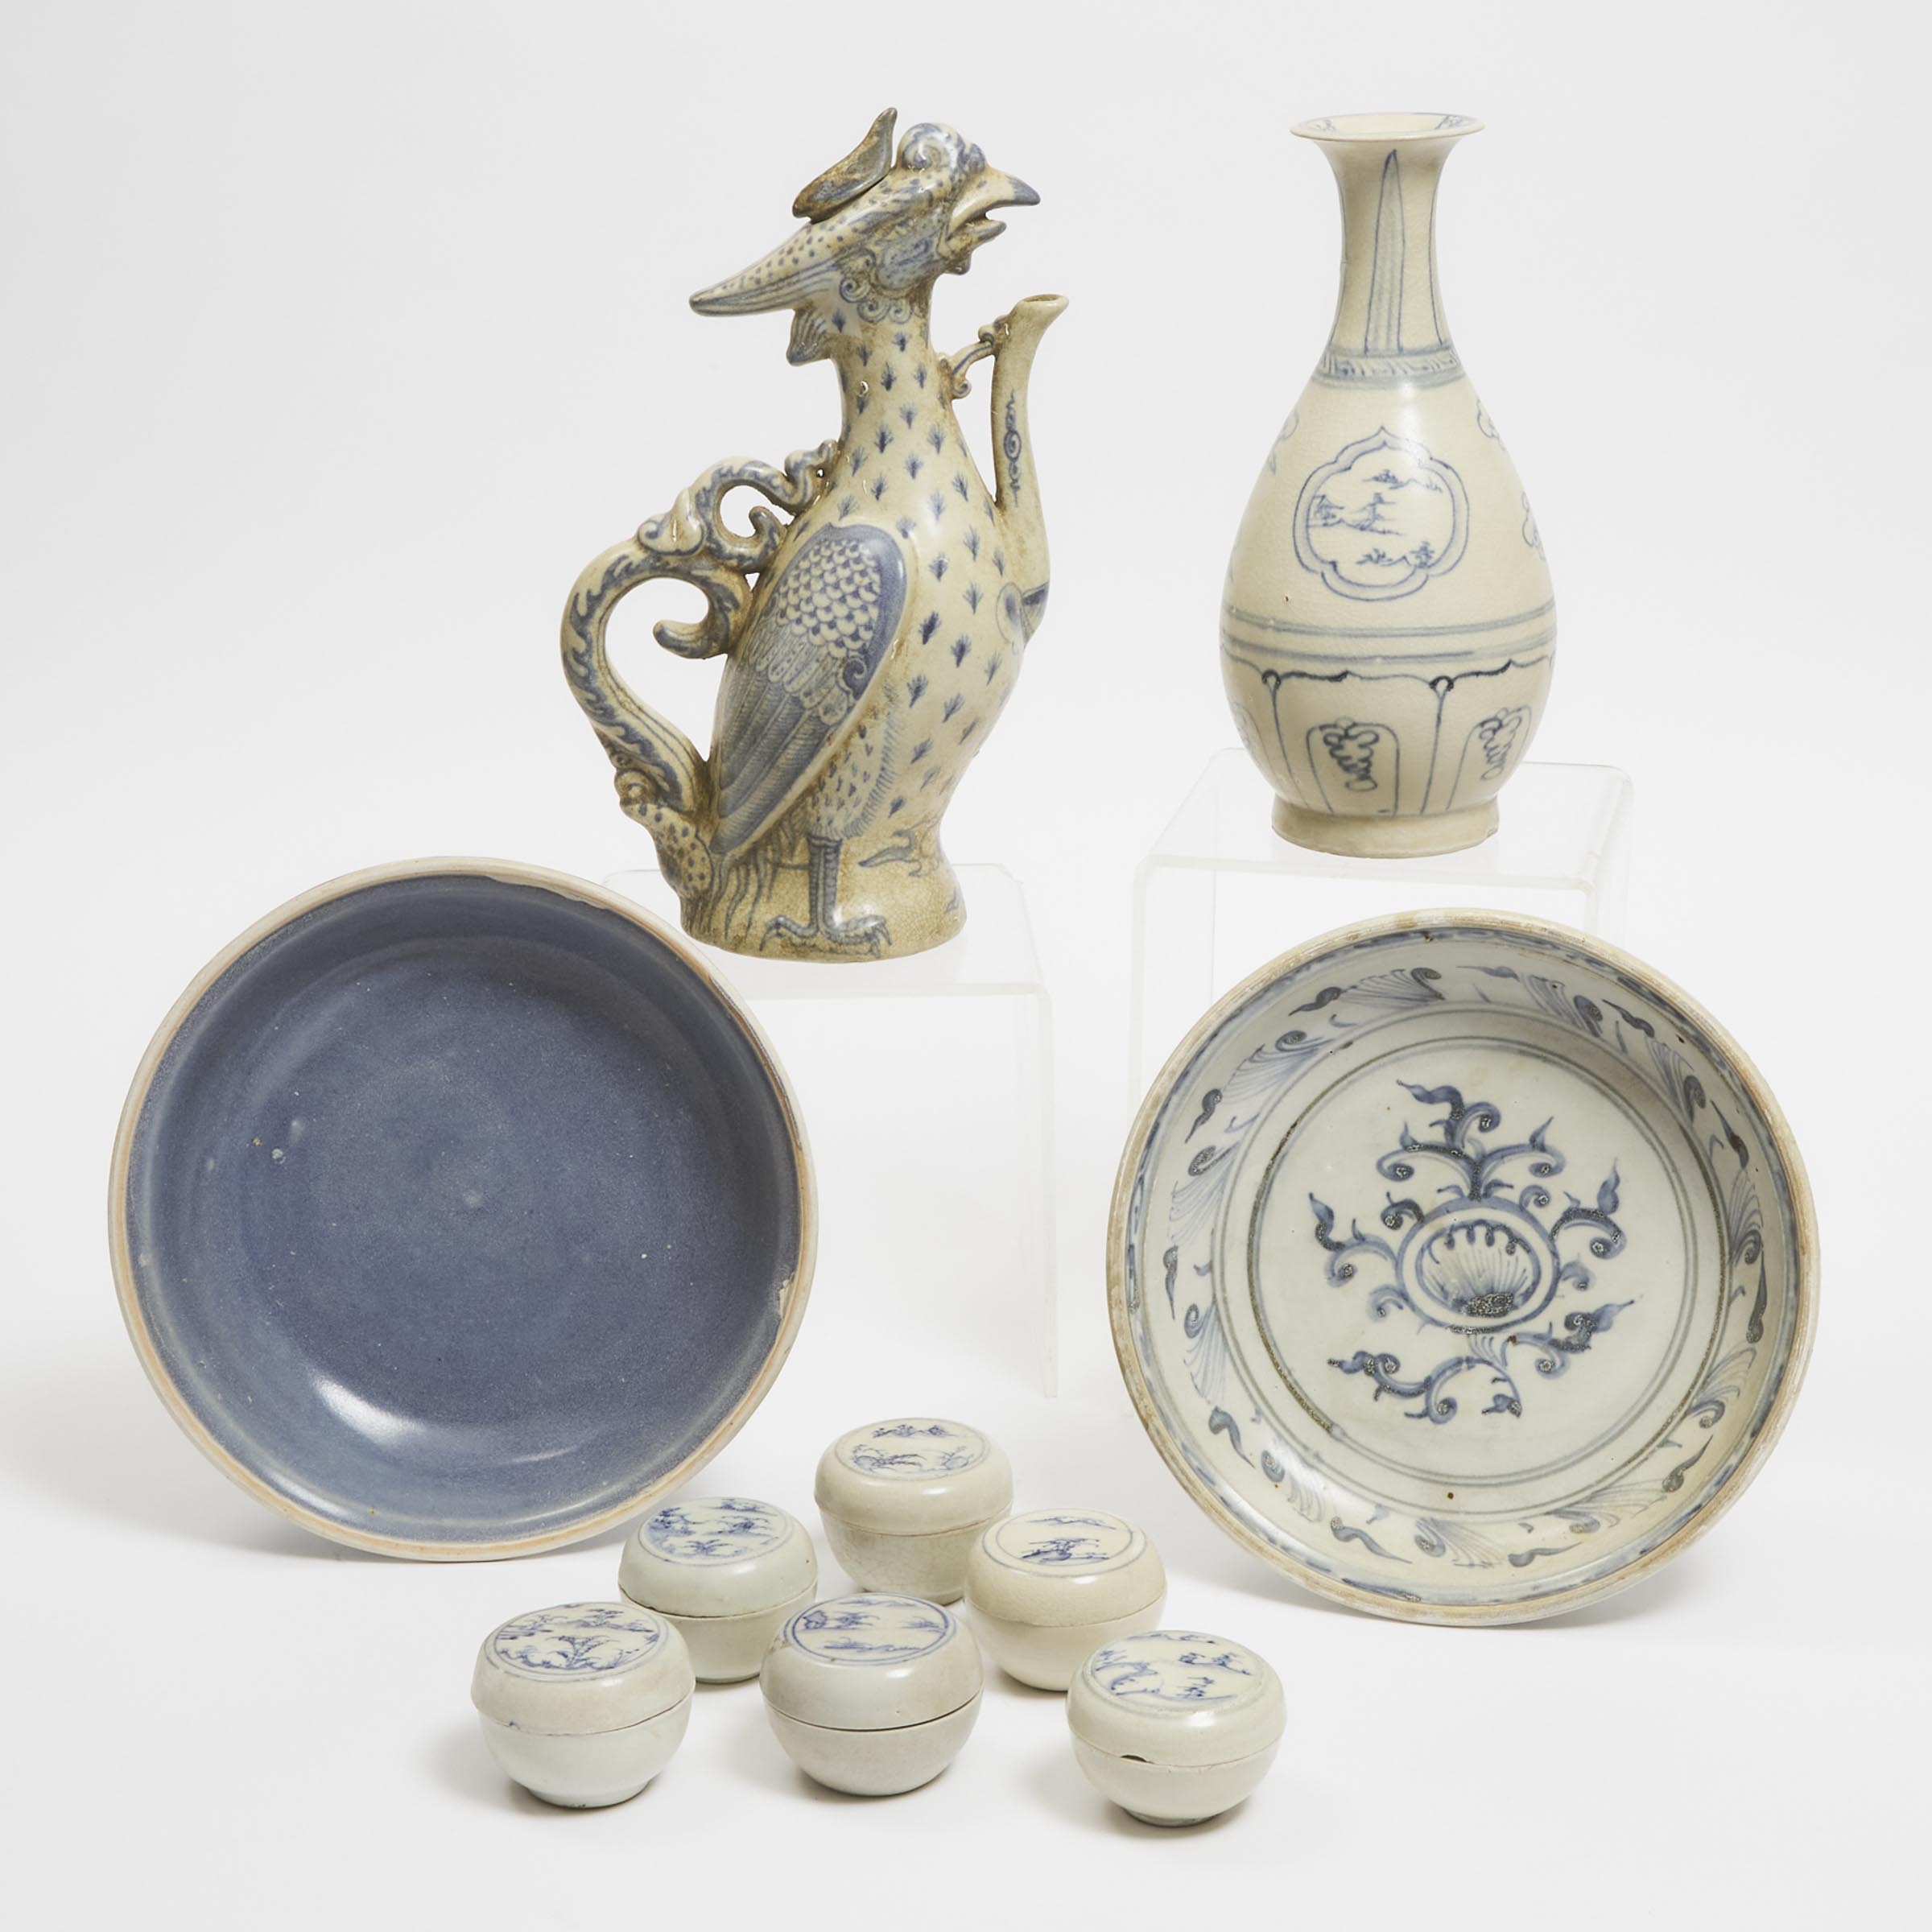 A Group of Ten Annamese/Vietnamese Blue and White 'Hoi An Hoard' Wares, 14th-16th Century